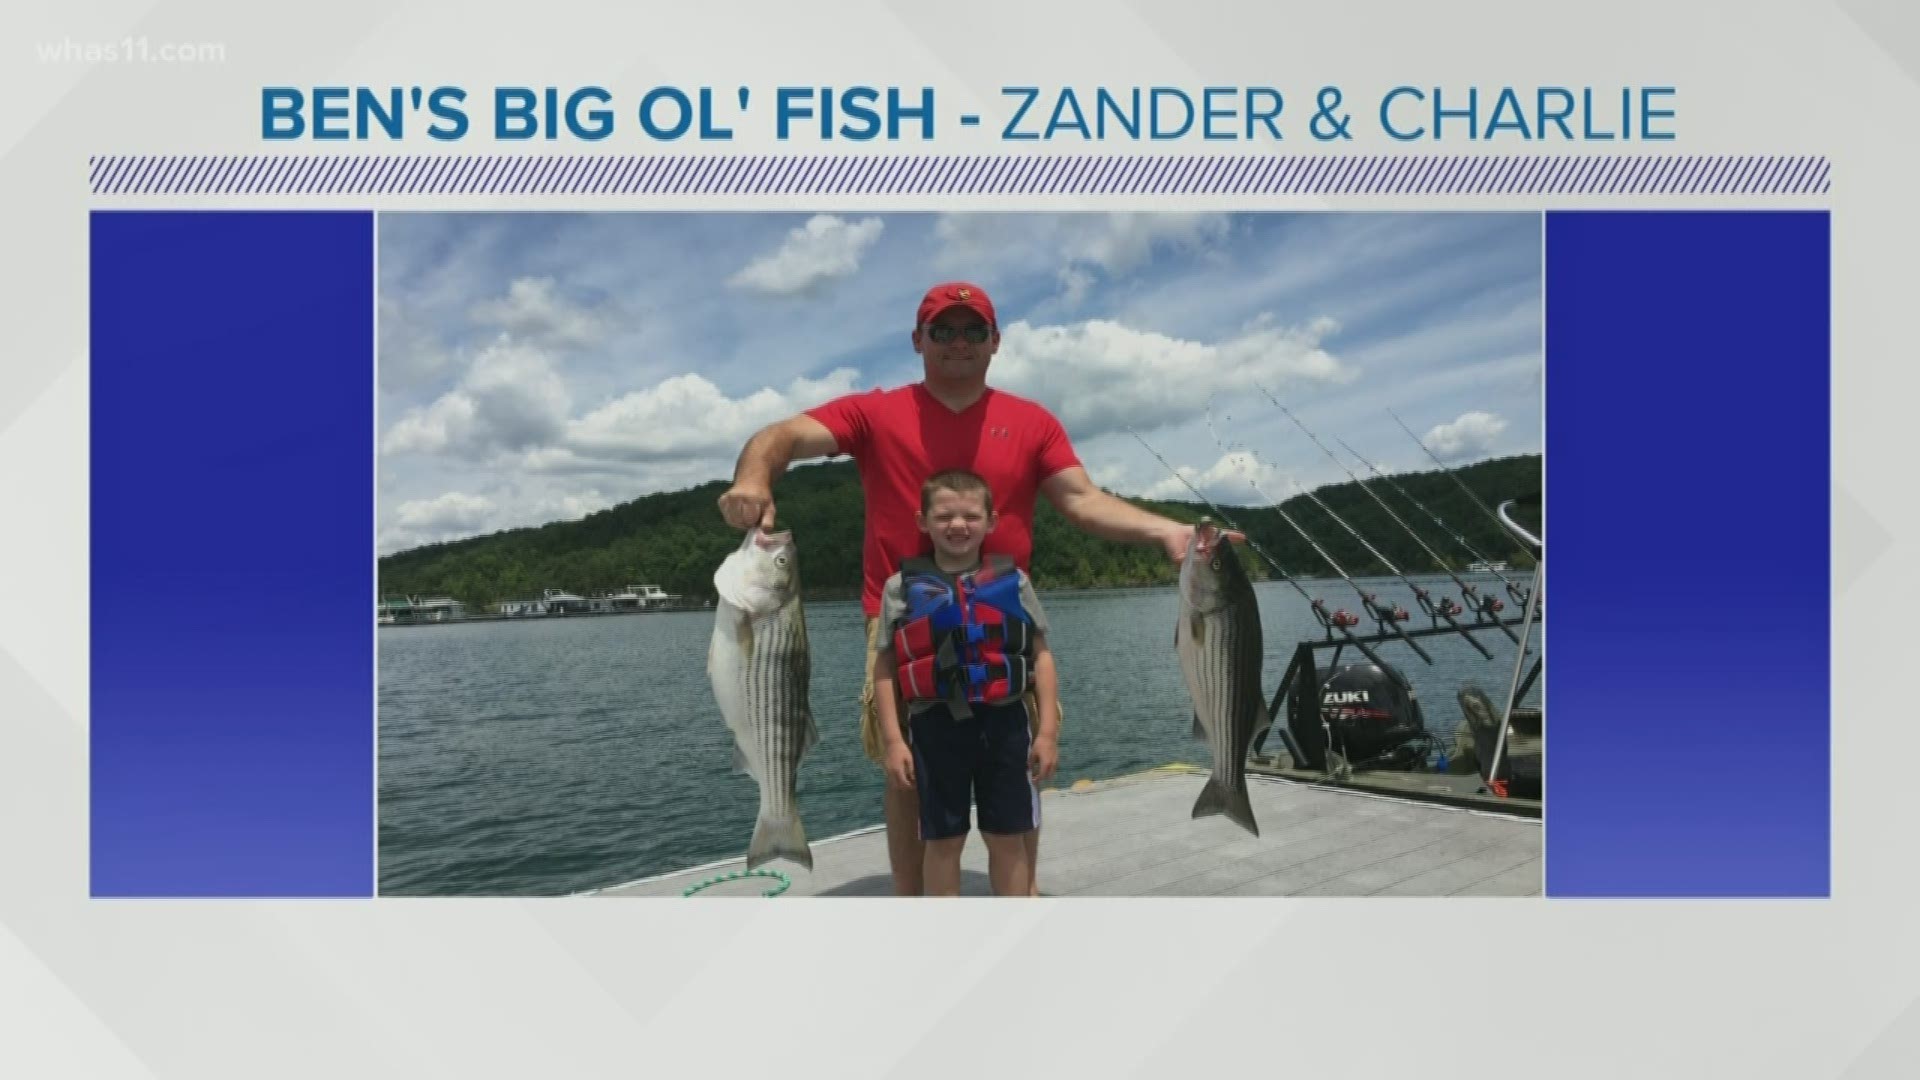 Congrats to Zander and Charlie for having the Big Ol' Fish of the week!